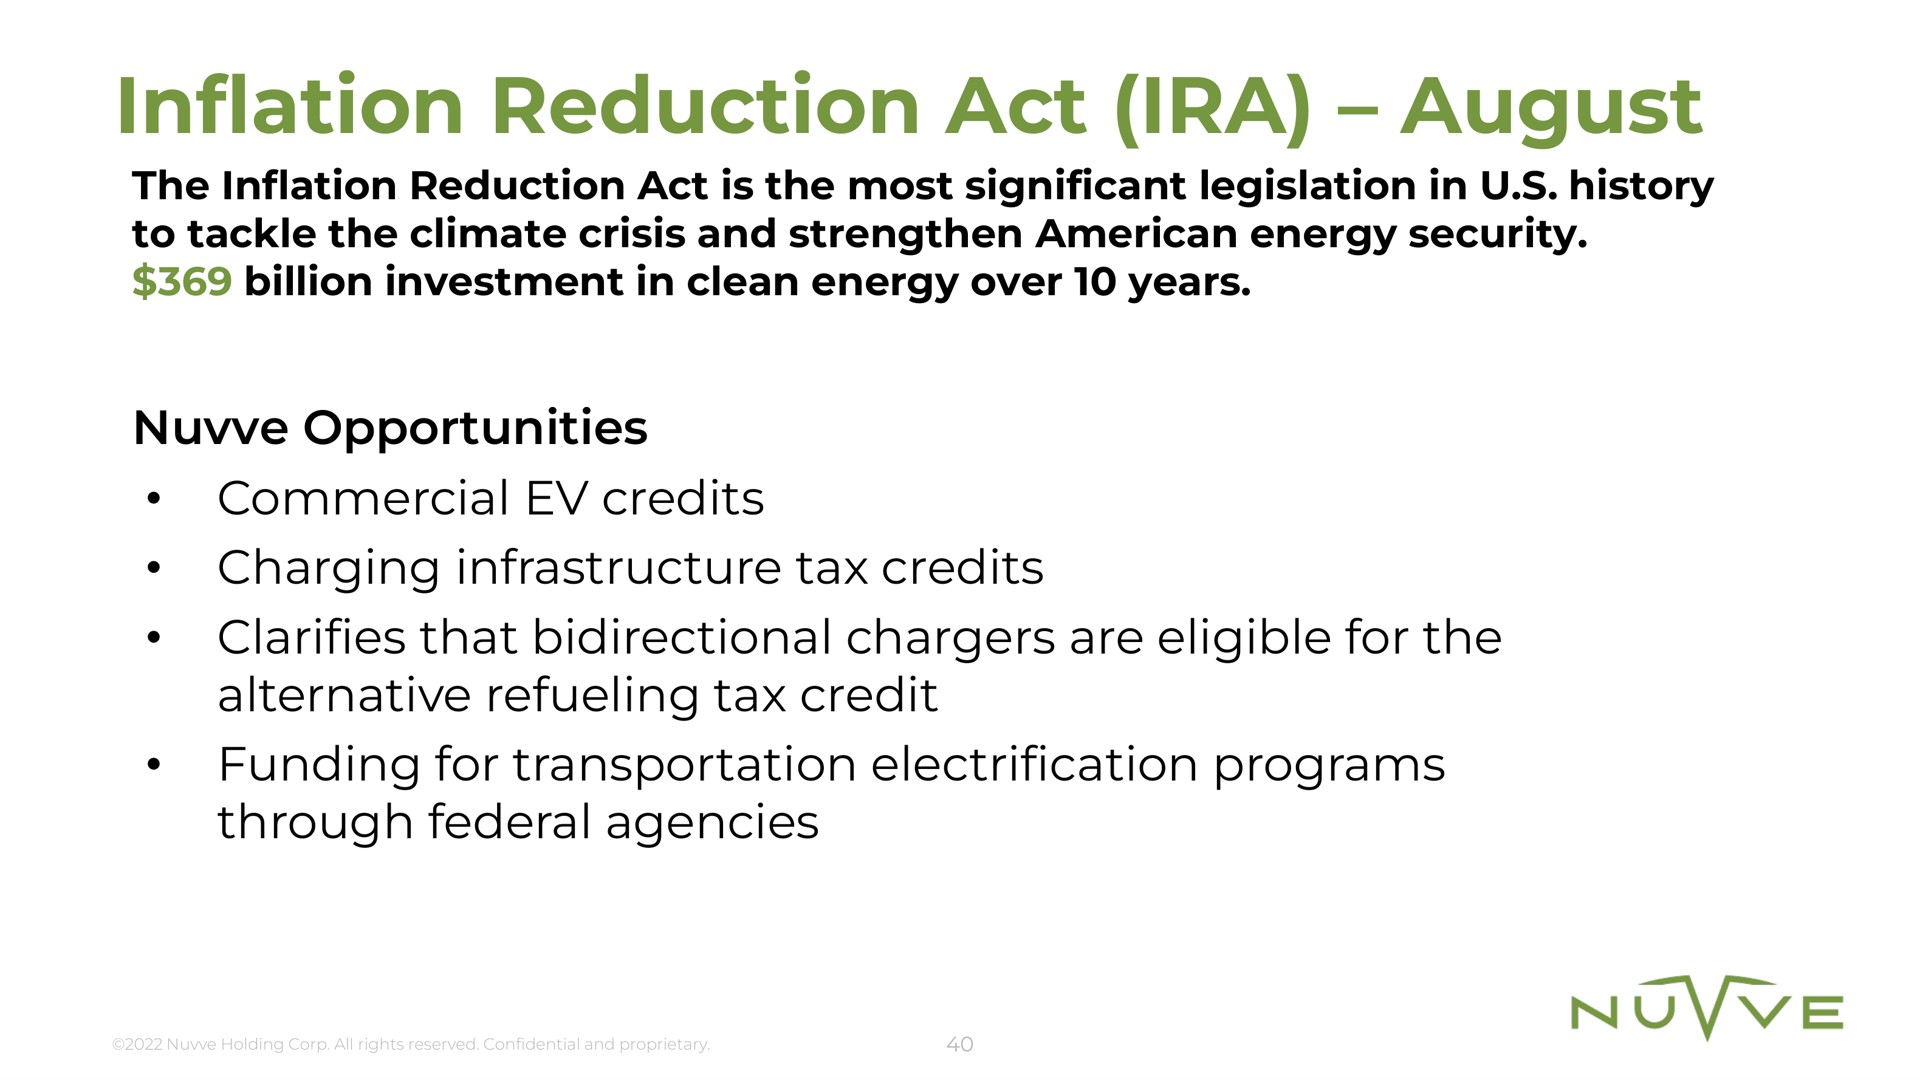 inflation reduction act august the is the most significant legislation in history to tackle the climate crisis and strengthen energy security opportunities commercial credits charging infrastructure tax credits clarifies that bidirectional chargers are eligible for the alternative refueling tax credit funding for transportation electrification programs through federal agencies | Nuvve